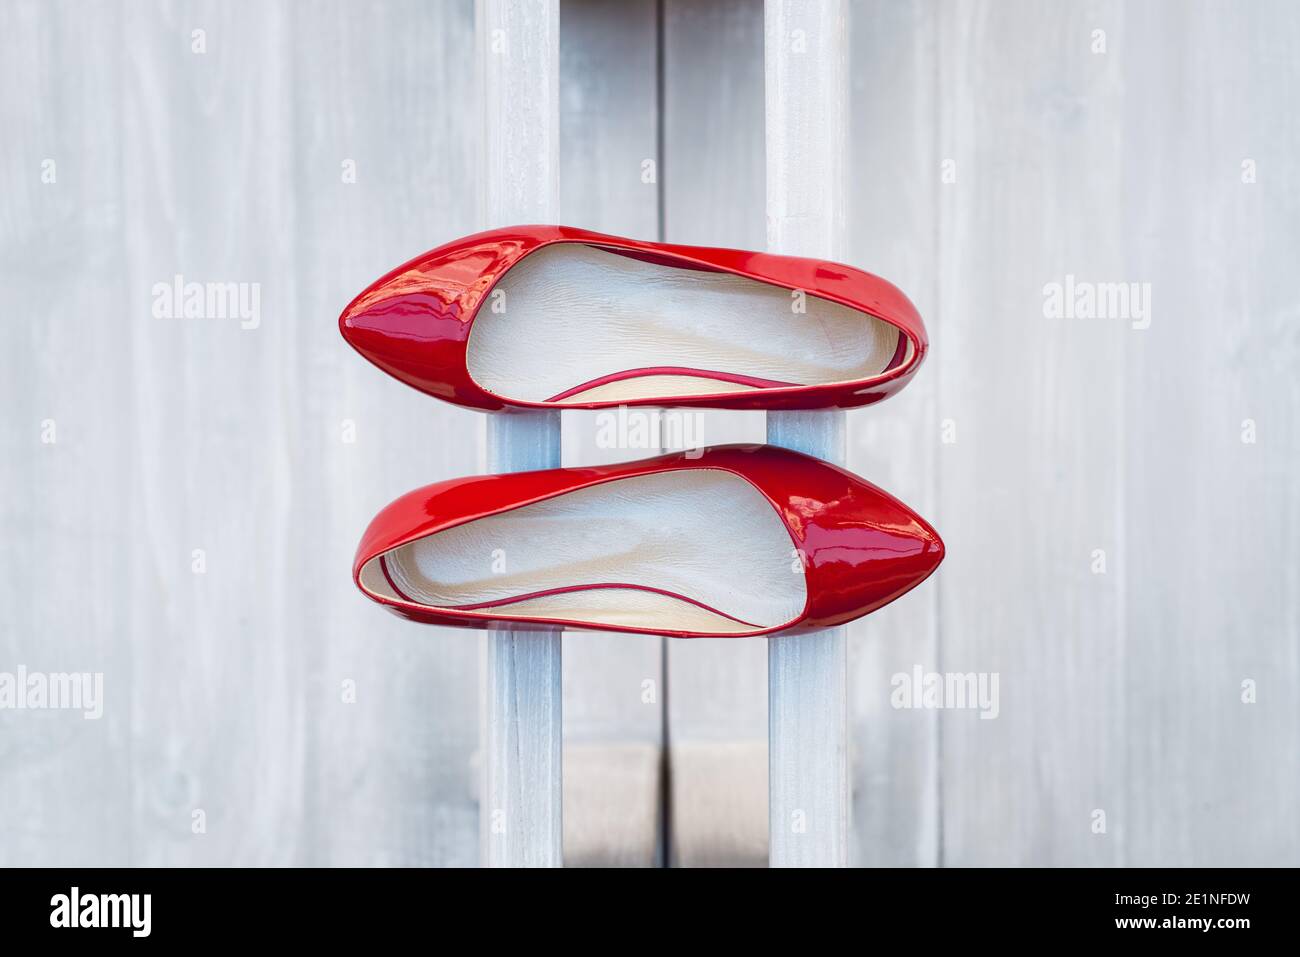 Leather red women's shoes on a white wooden shelf. Fashion, minimal fashion concept, women's shoes, accessories. red women's lacquered leather shoes Stock Photo